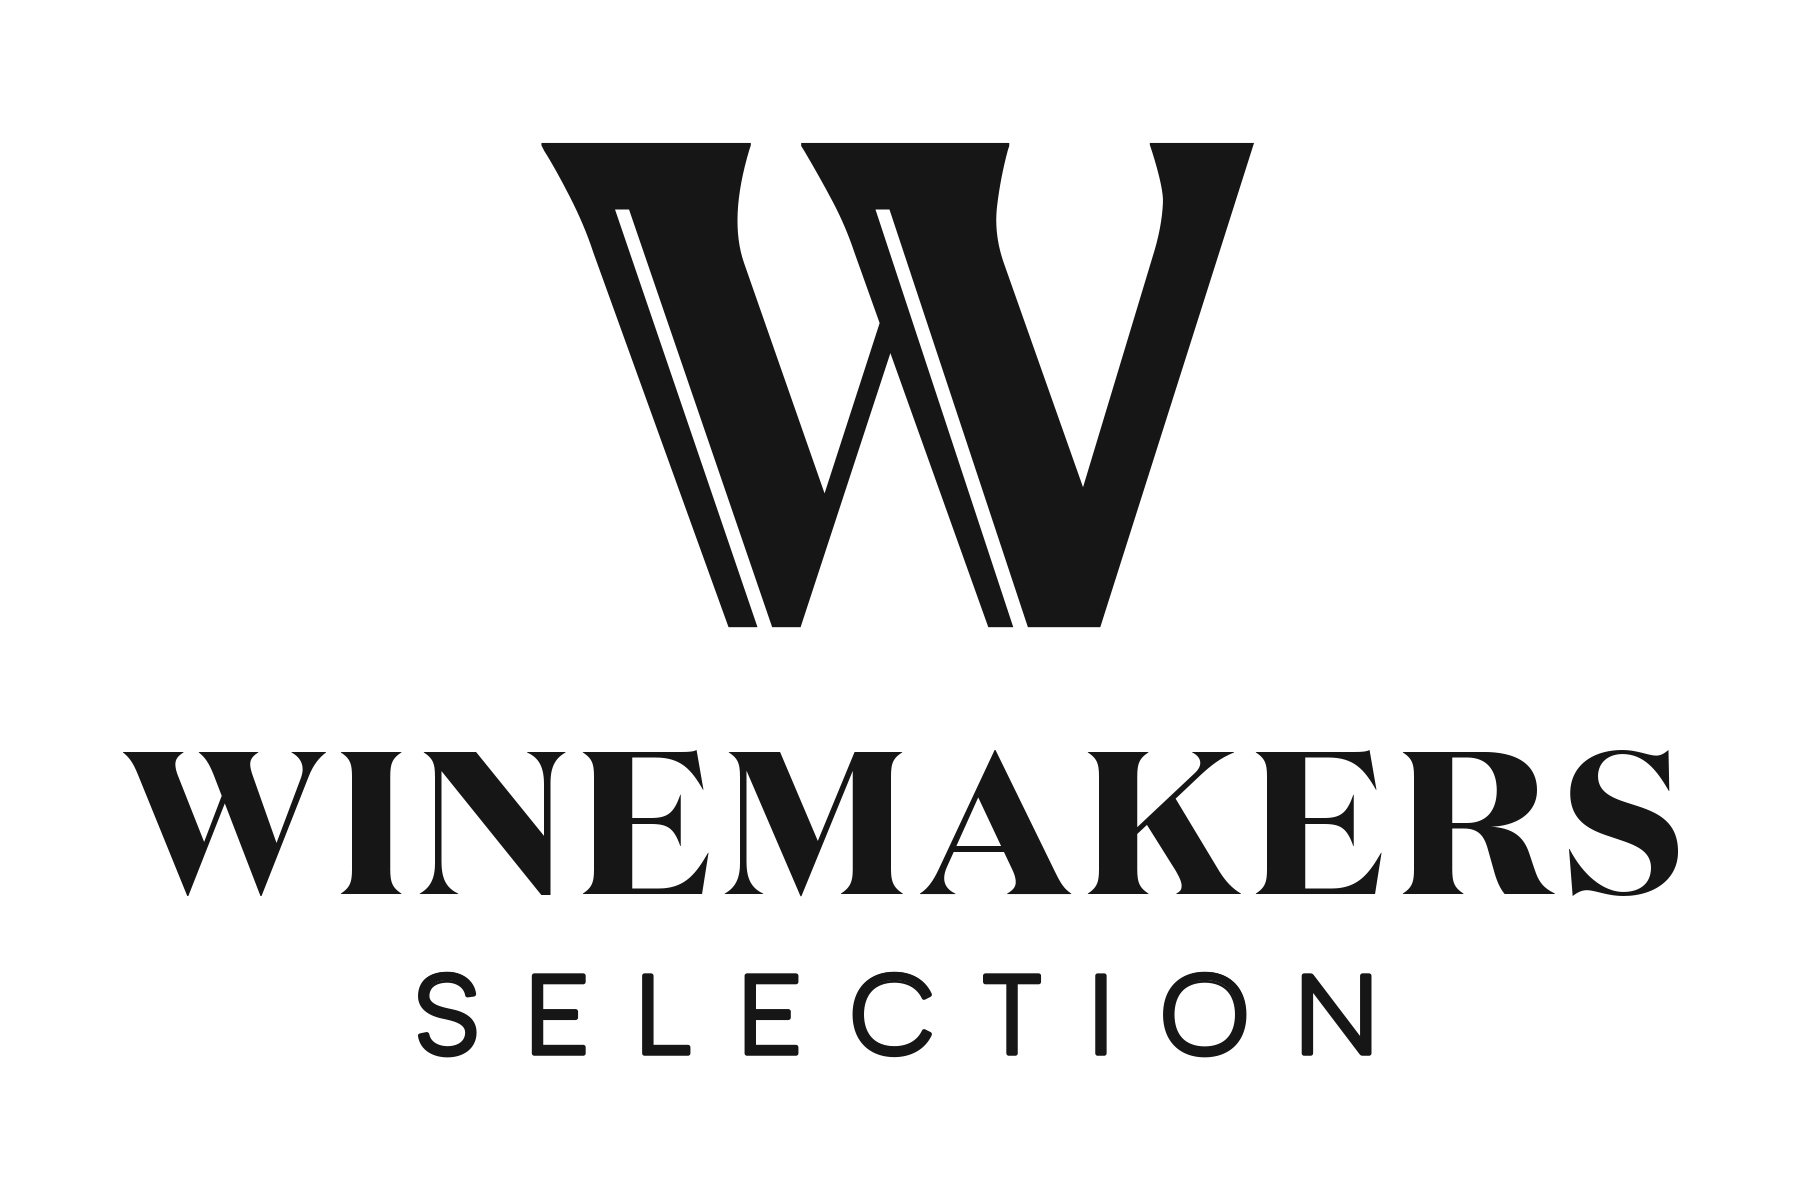  W, WINEMAKERS SELECTION